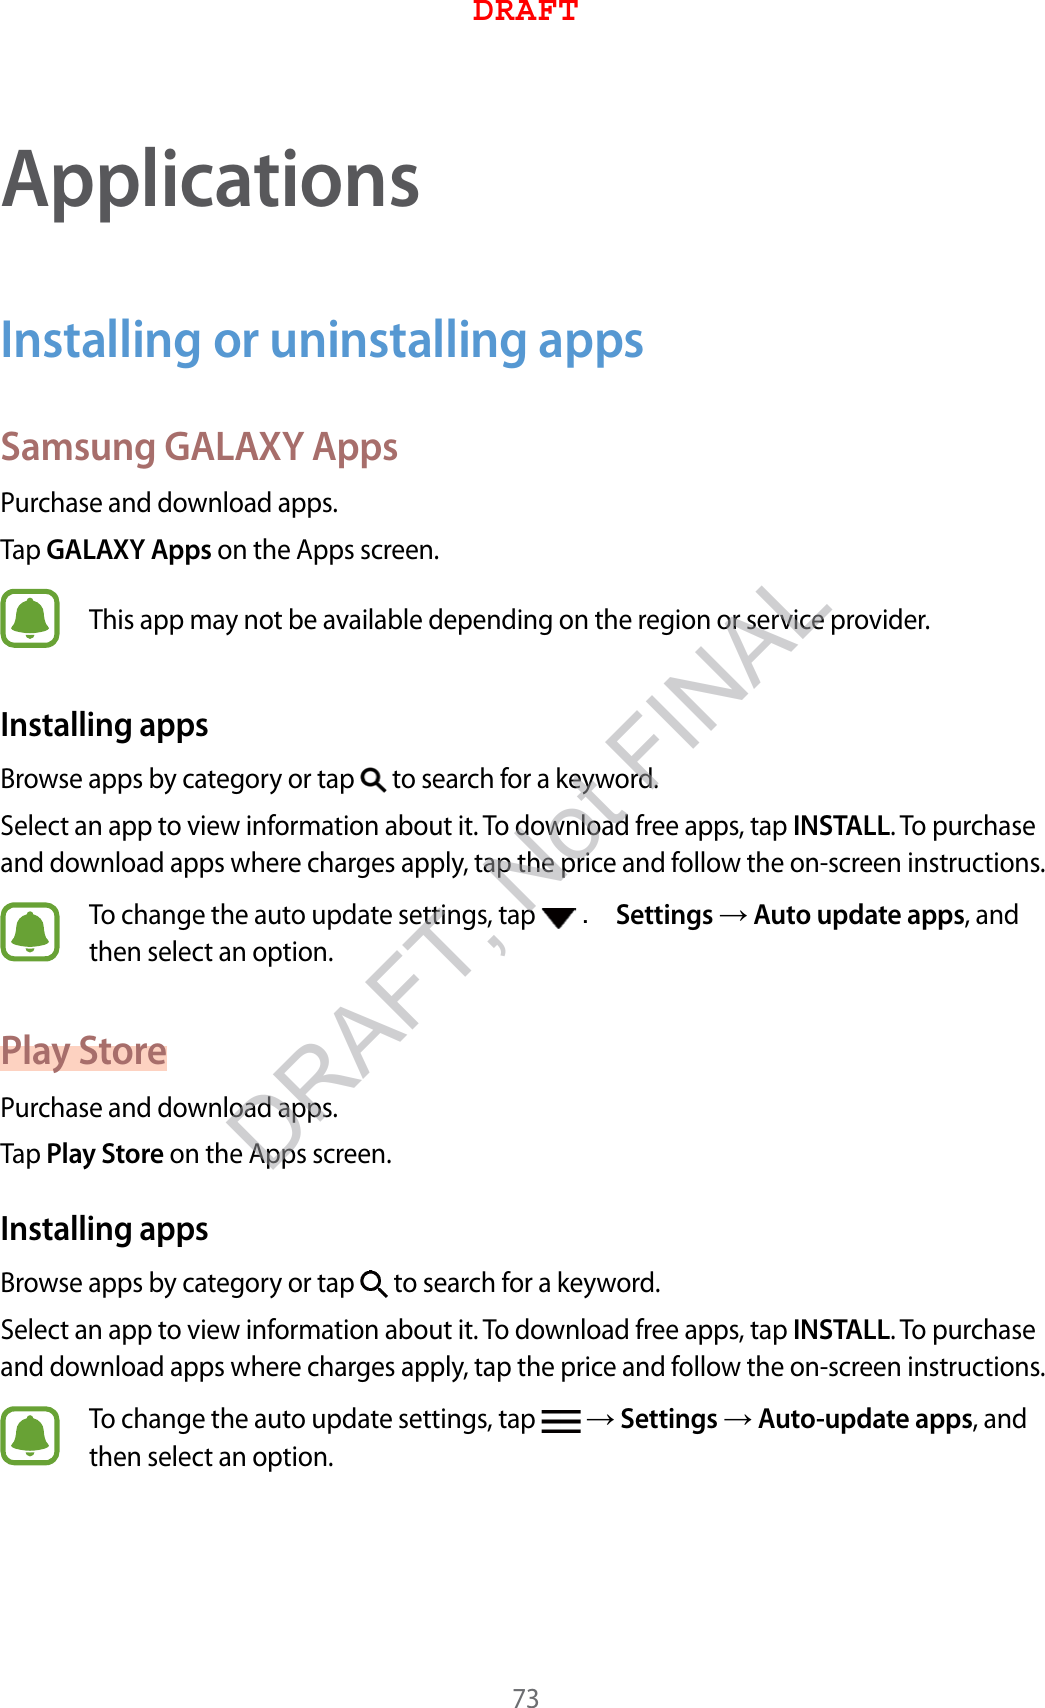 73ApplicationsInstalling or uninstalling appsSamsung GALAXY AppsPurchase and download apps.Tap GALAXY Apps on the Apps screen.This app may not be available depending on the region or service provider.Installing appsBrowse apps by category or tap   to search for a keyword.Select an app to view information about it. To download free apps, tap INSTALL. To purchase and download apps where charges apply, tap the price and follow the on-screen instructions.To change the auto update settings, tap   . Settings  Auto update apps, and then select an option.Play StorePurchase and download apps.Tap Play Store on the Apps screen.Installing appsBrowse apps by category or tap   to search for a keyword.Select an app to view information about it. To download free apps, tap INSTALL. To purchase and download apps where charges apply, tap the price and follow the on-screen instructions.To change the auto update settings, tap    Settings  Auto-update apps, and then select an option.DRAFTDRAFT, Not FINAL